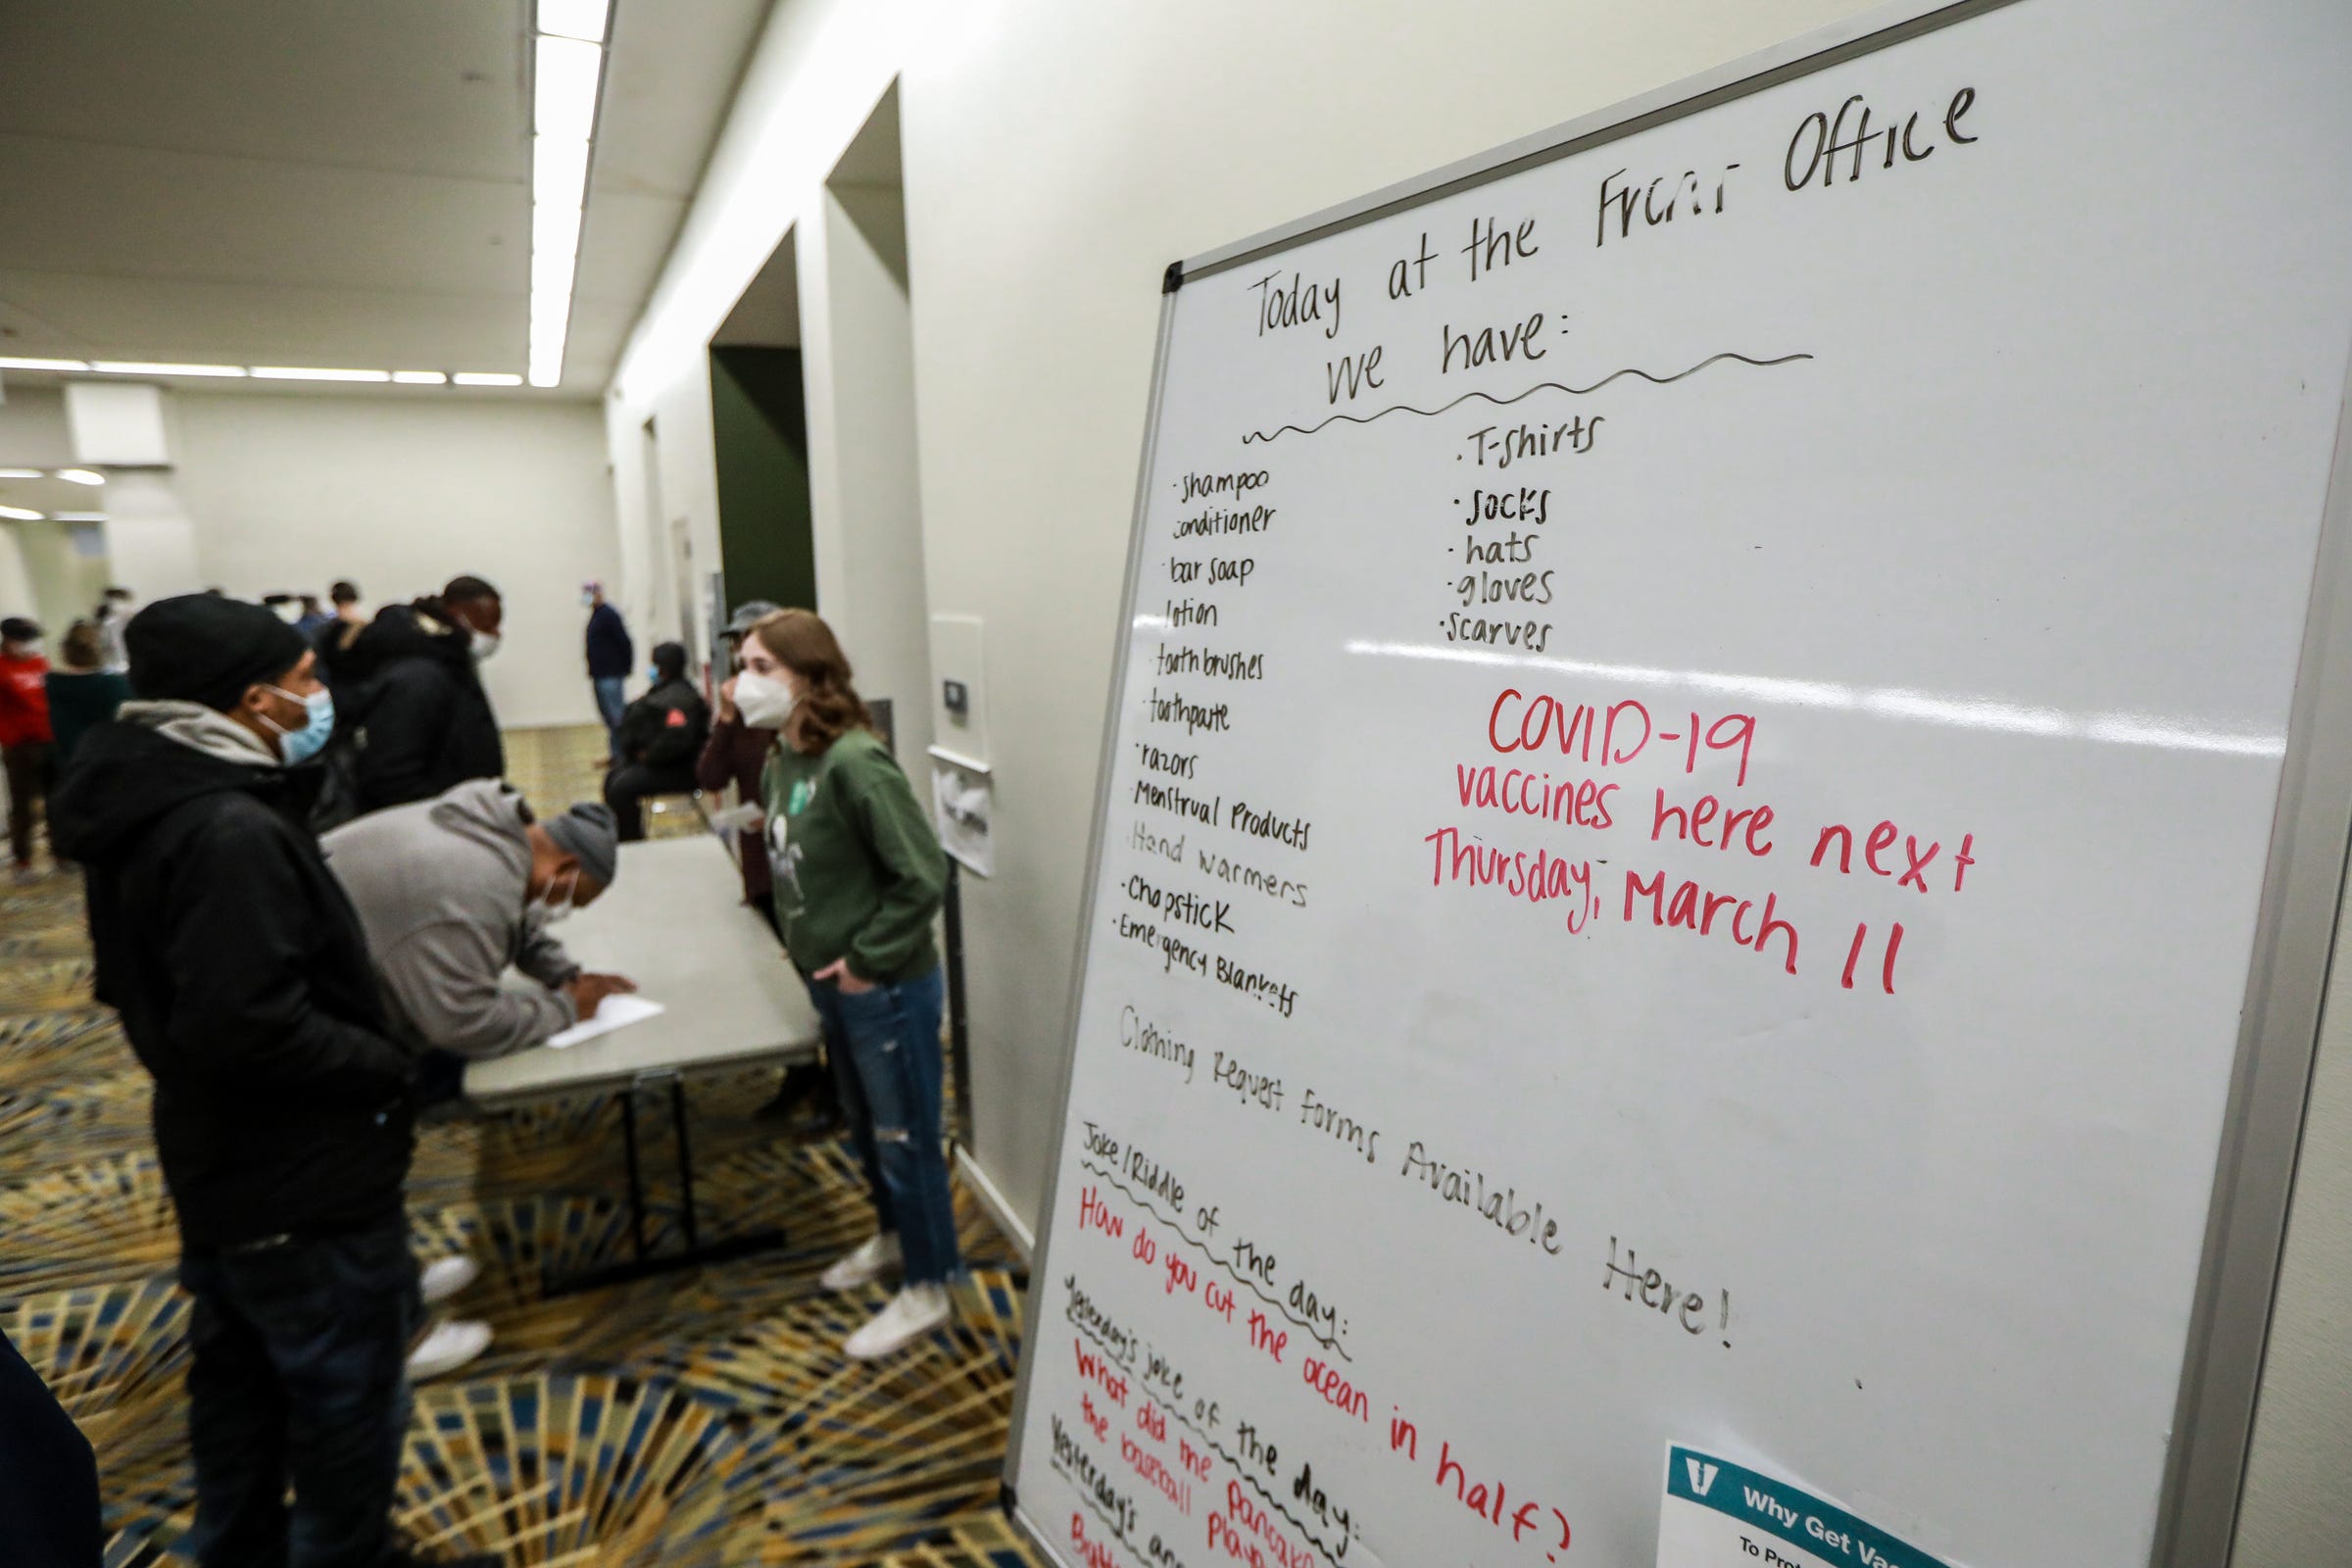 Men and women stop at the Front Office to receive vital resources like socks, gloves, and toiletries at the Pope Francis Center in TCF Center in downtown Detroit on March 6, 2021. The whiteboard also says COVID-19 vaccines will be available next Thursday, March 11th.